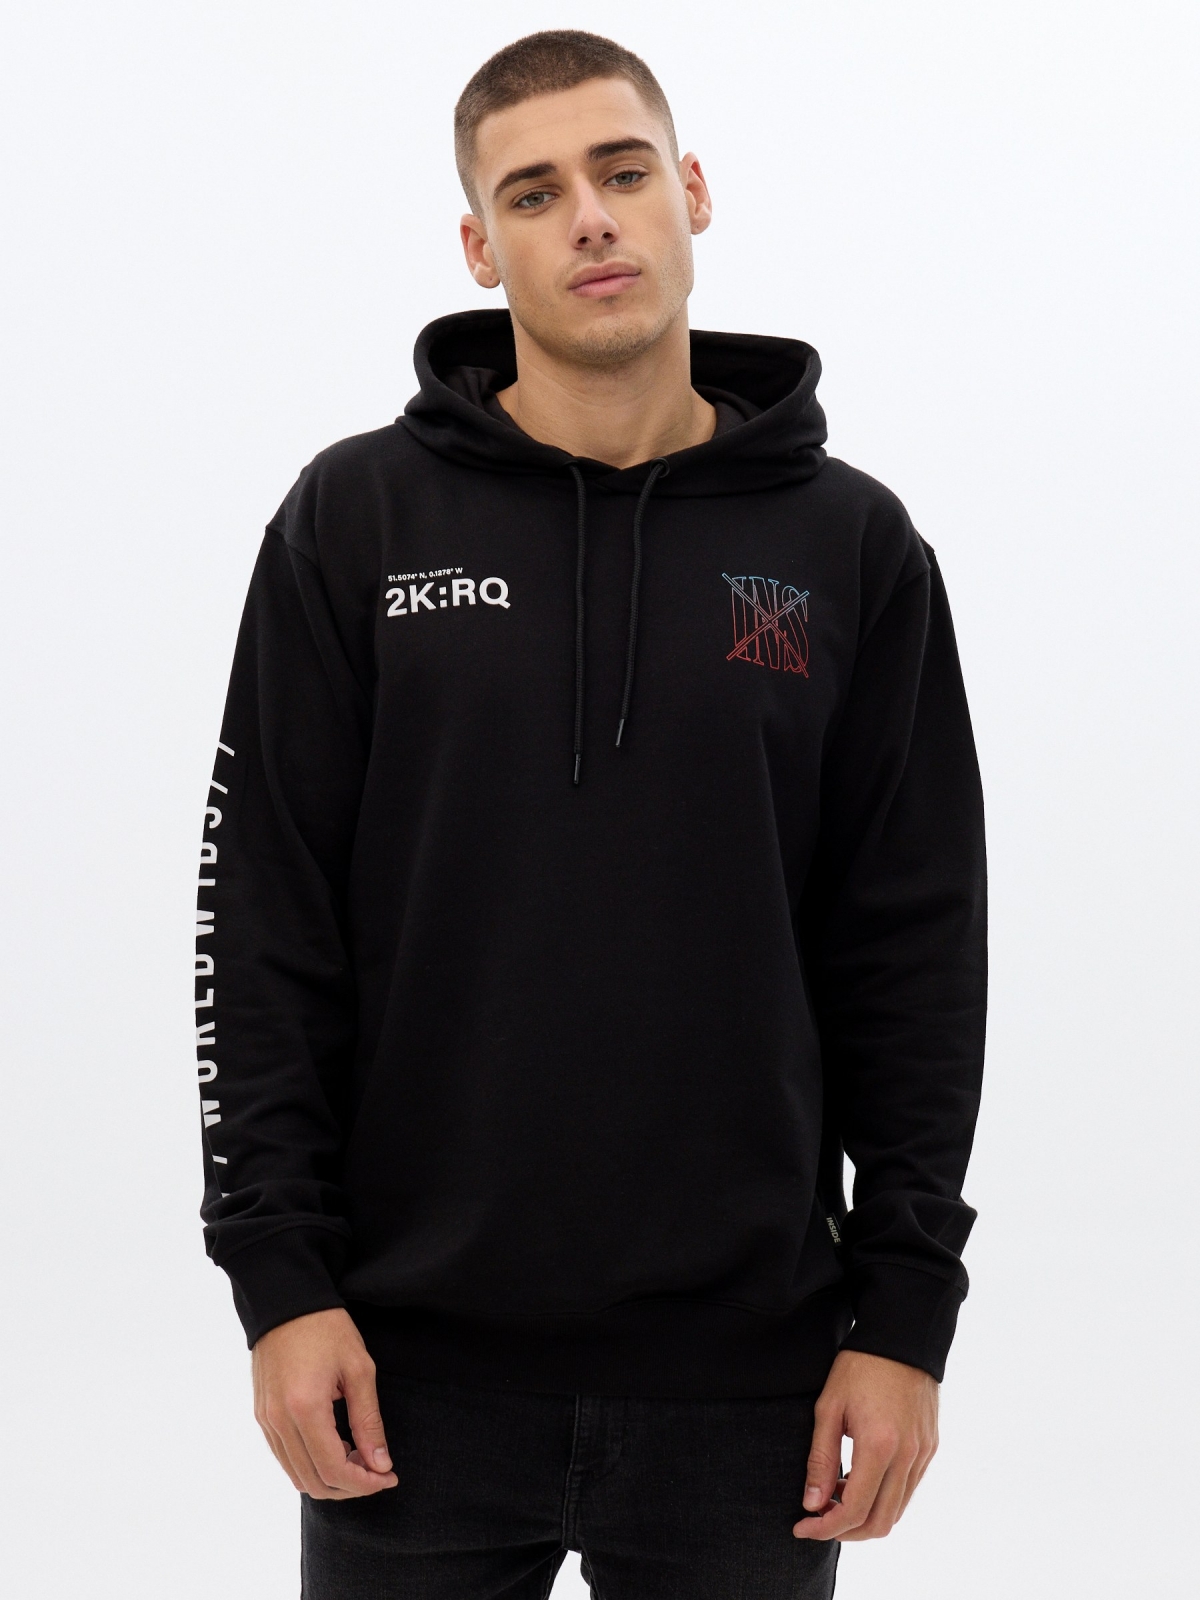 Print hooded sweatshirt black middle front view